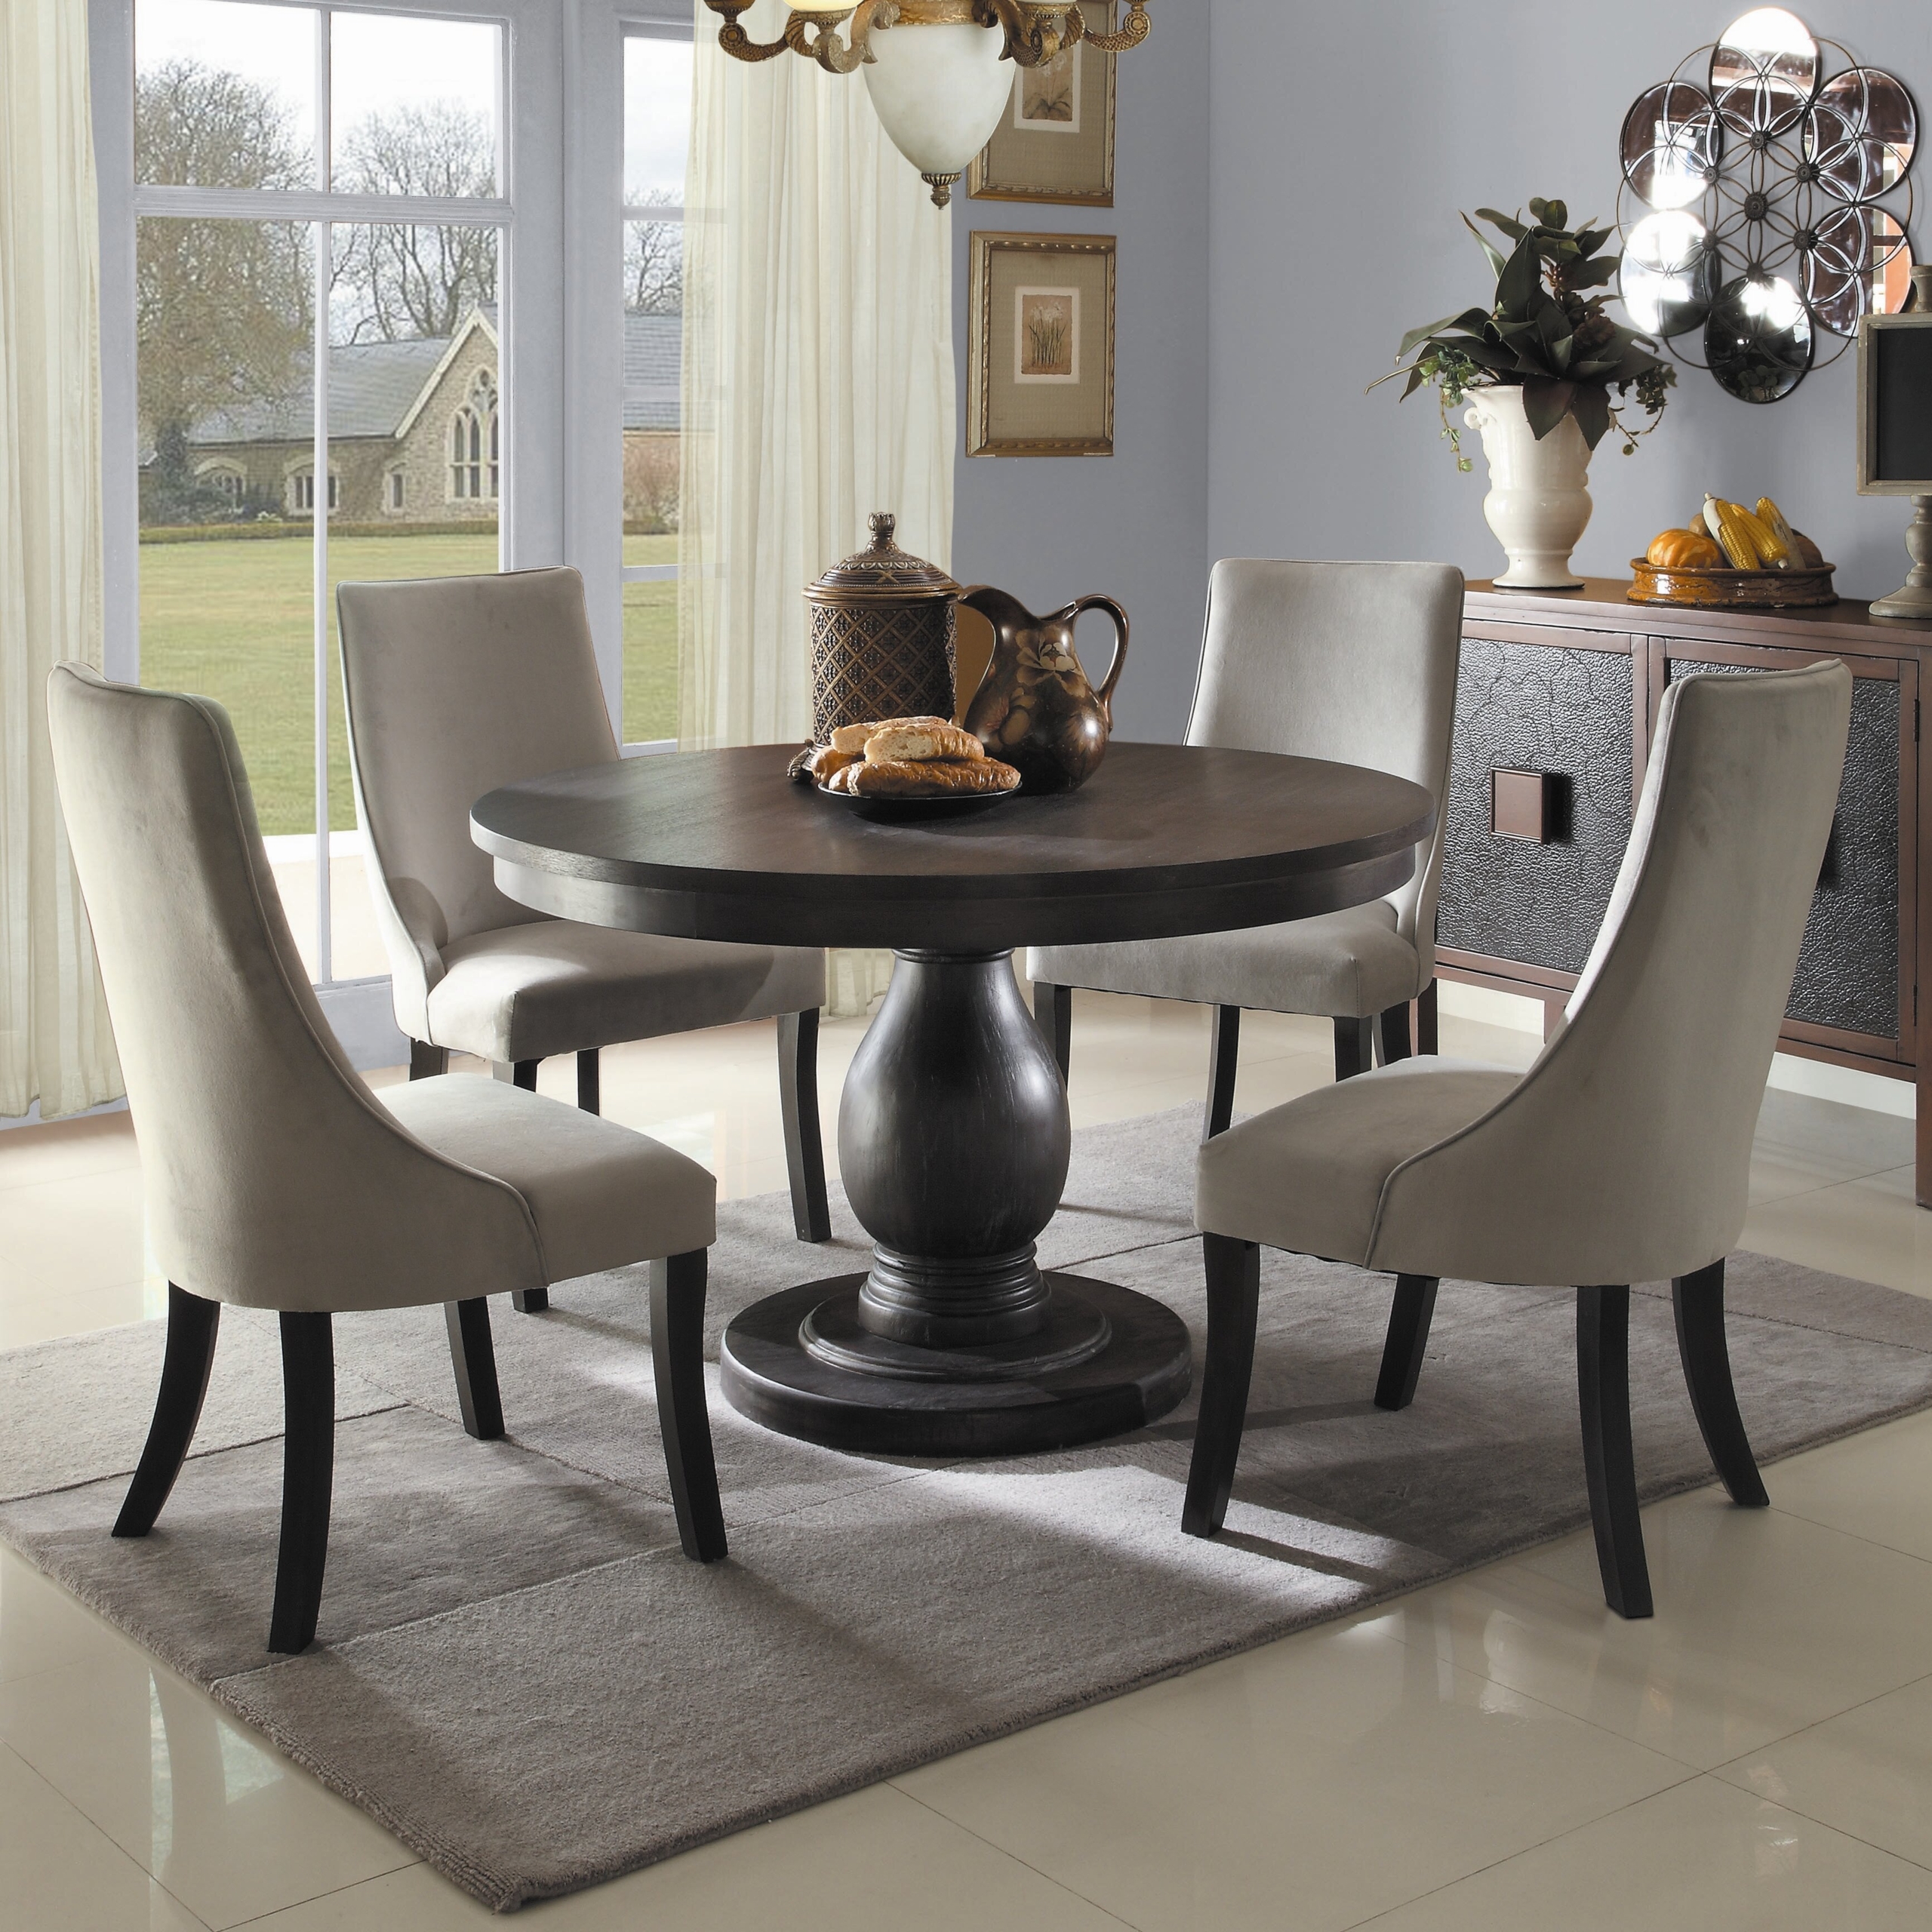 48 Inch Round Dining Table Visualhunt, 48 Inch Round Table And Chairs